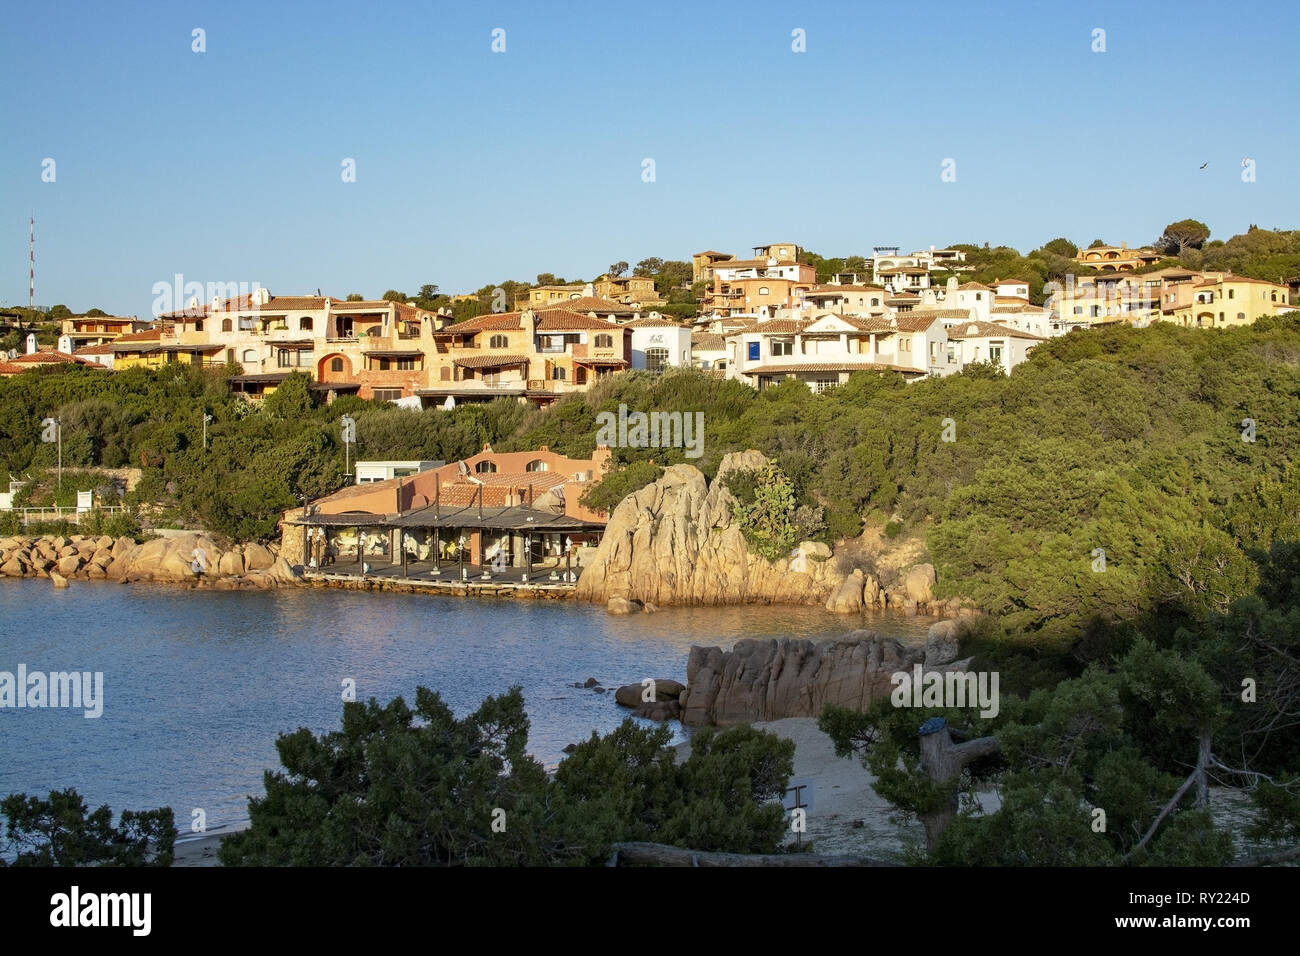 PORTO CERVO, SARDINIA, ITALY - MARCH 2, 2019: Colorful buildings in the port on a sunny afternoon on March 2, 2019 in Porto Cervo, Sardinia, Italy. Stock Photo